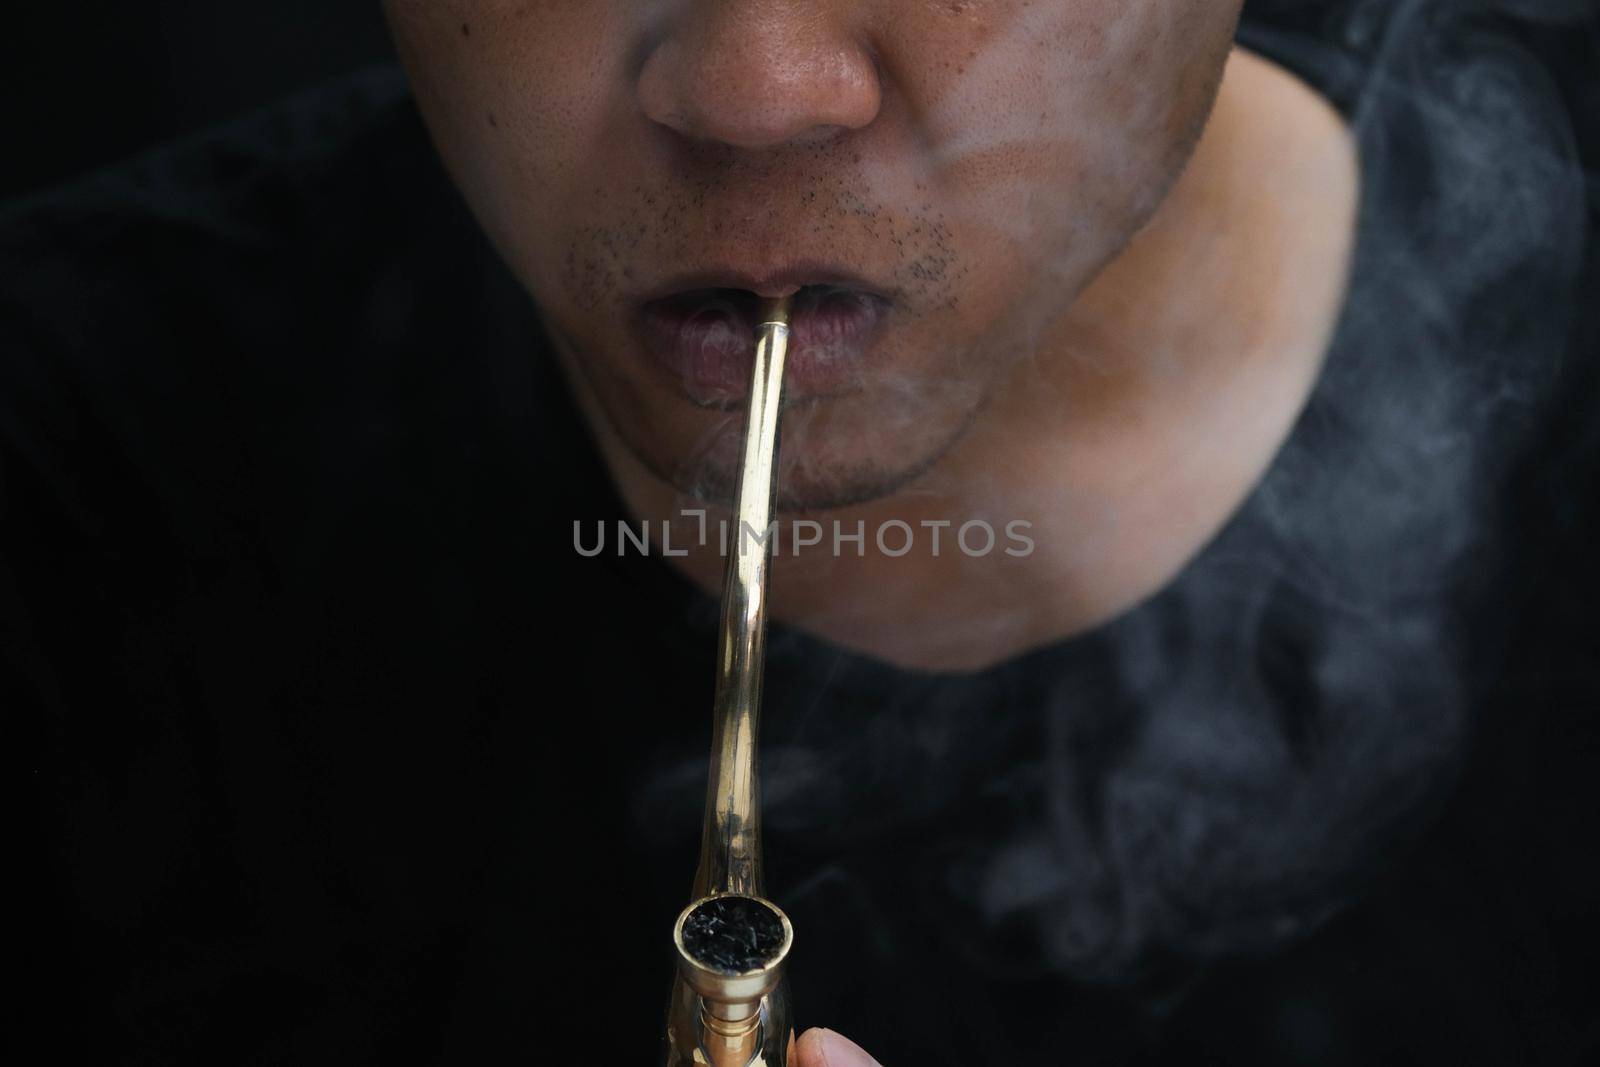 Asian man smokes marijuana from a pipe at home. Studio shoot with model simulating smoking pot with a pipe in a dark background. Cannabis legalisation.